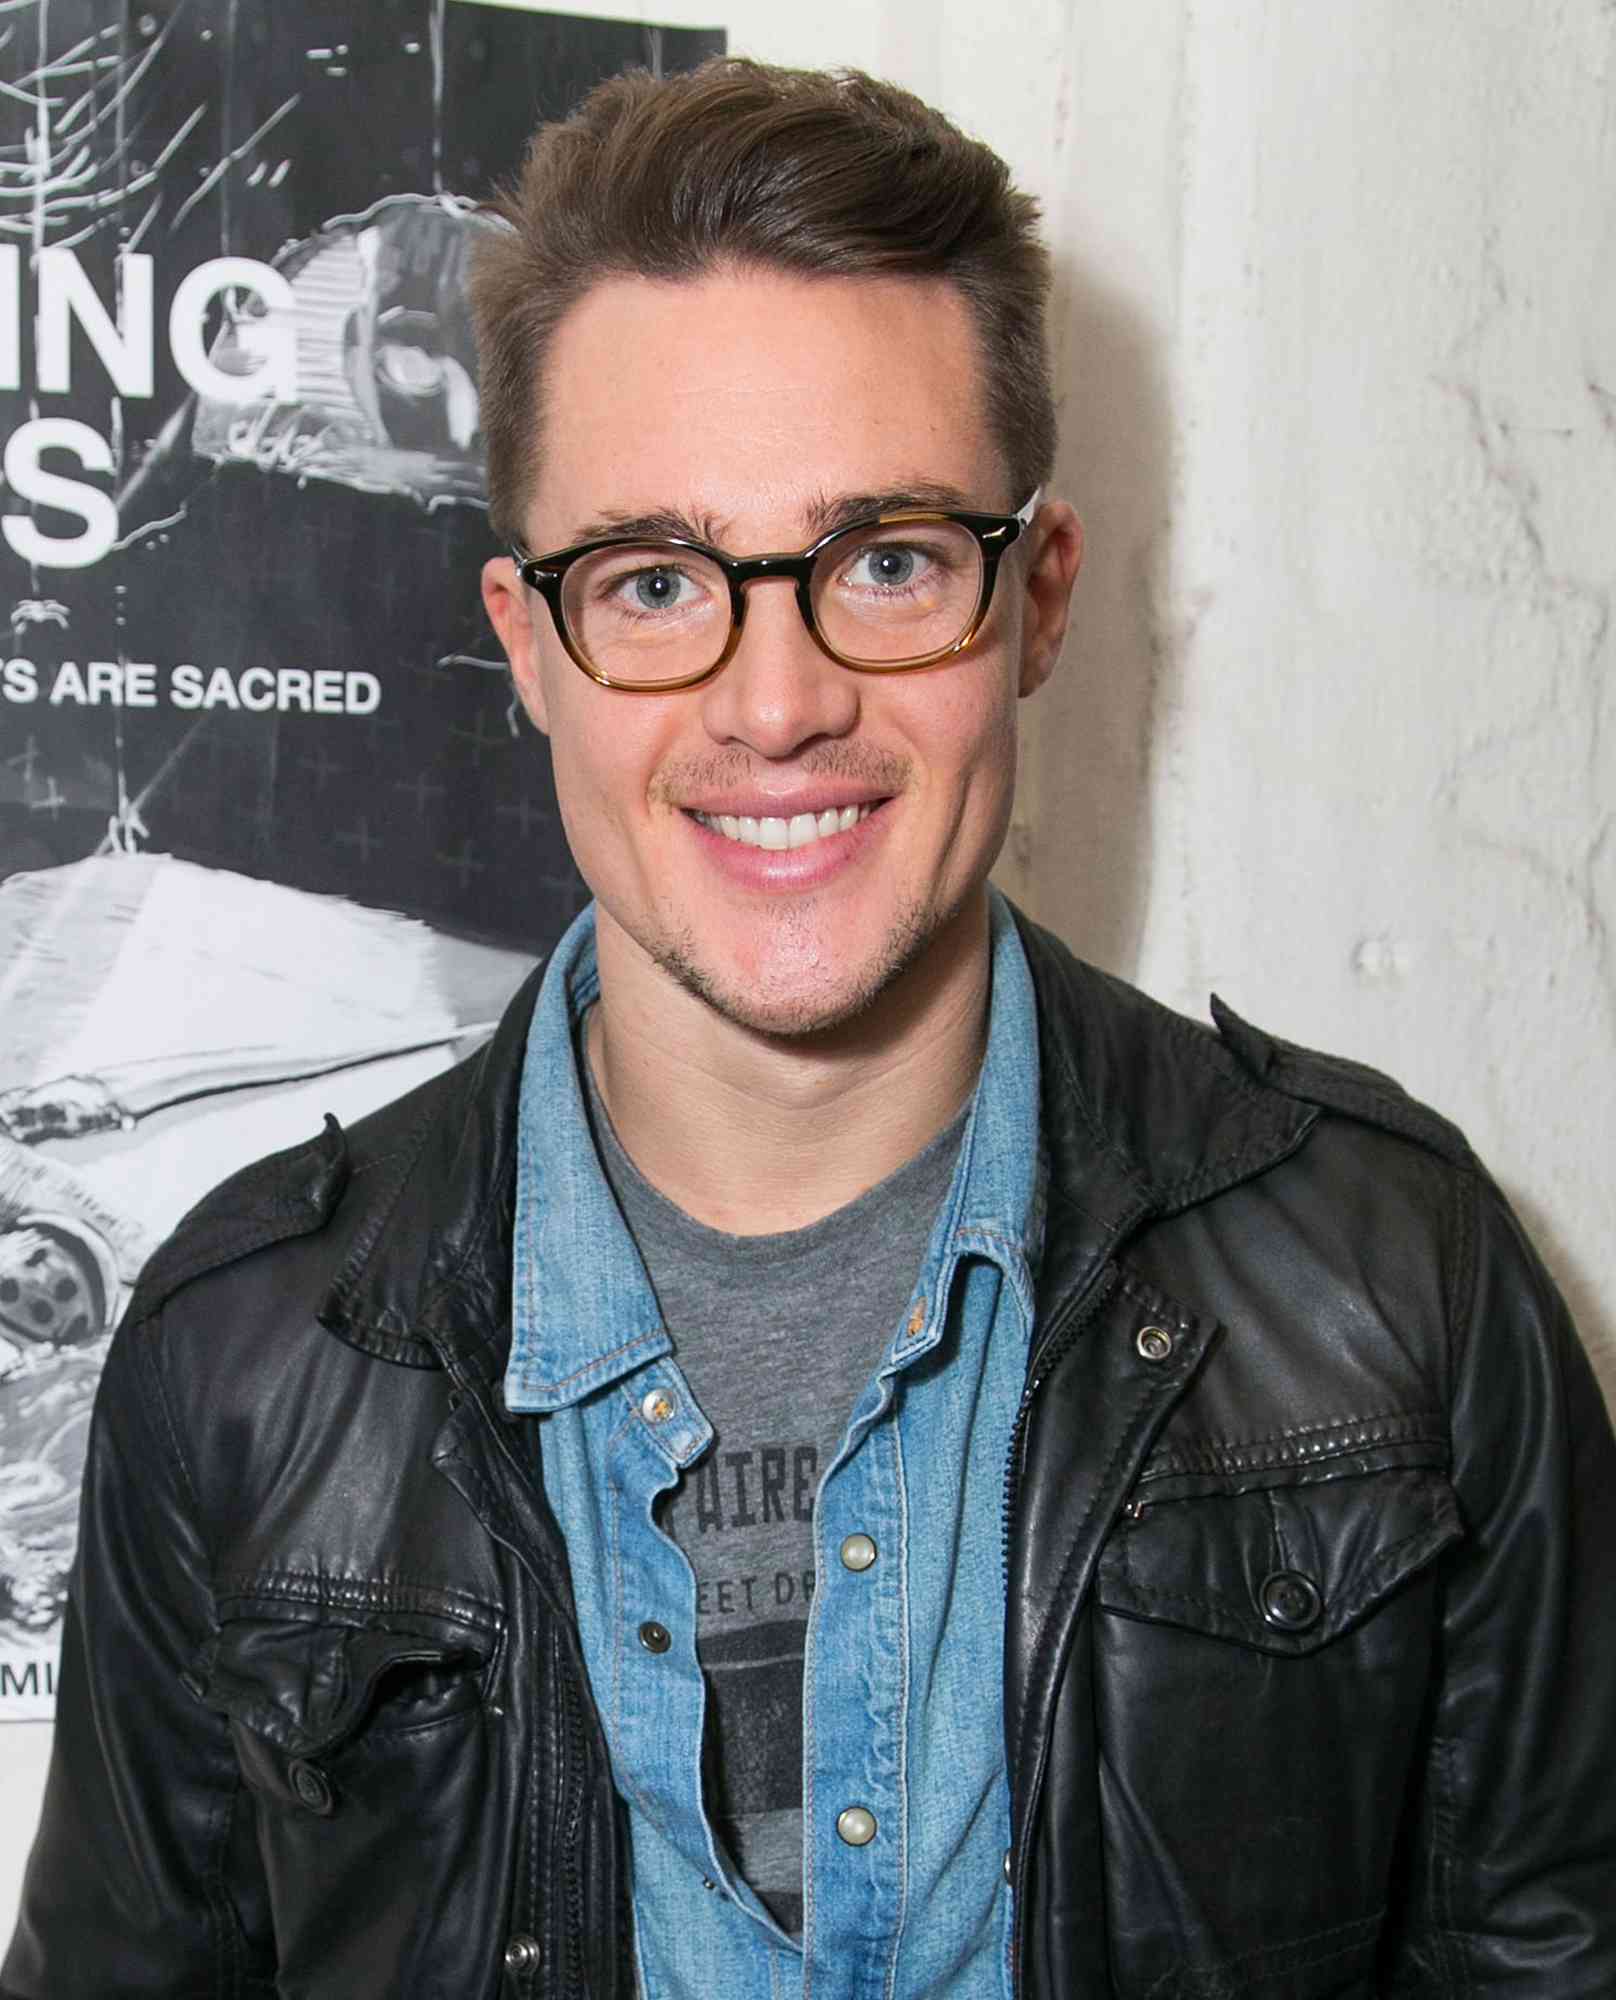 Alexander Dreymon attends the "Guys Reading Poems" fundraiser at V Wine Bar on April 11, 2014 in West Hollywood, California